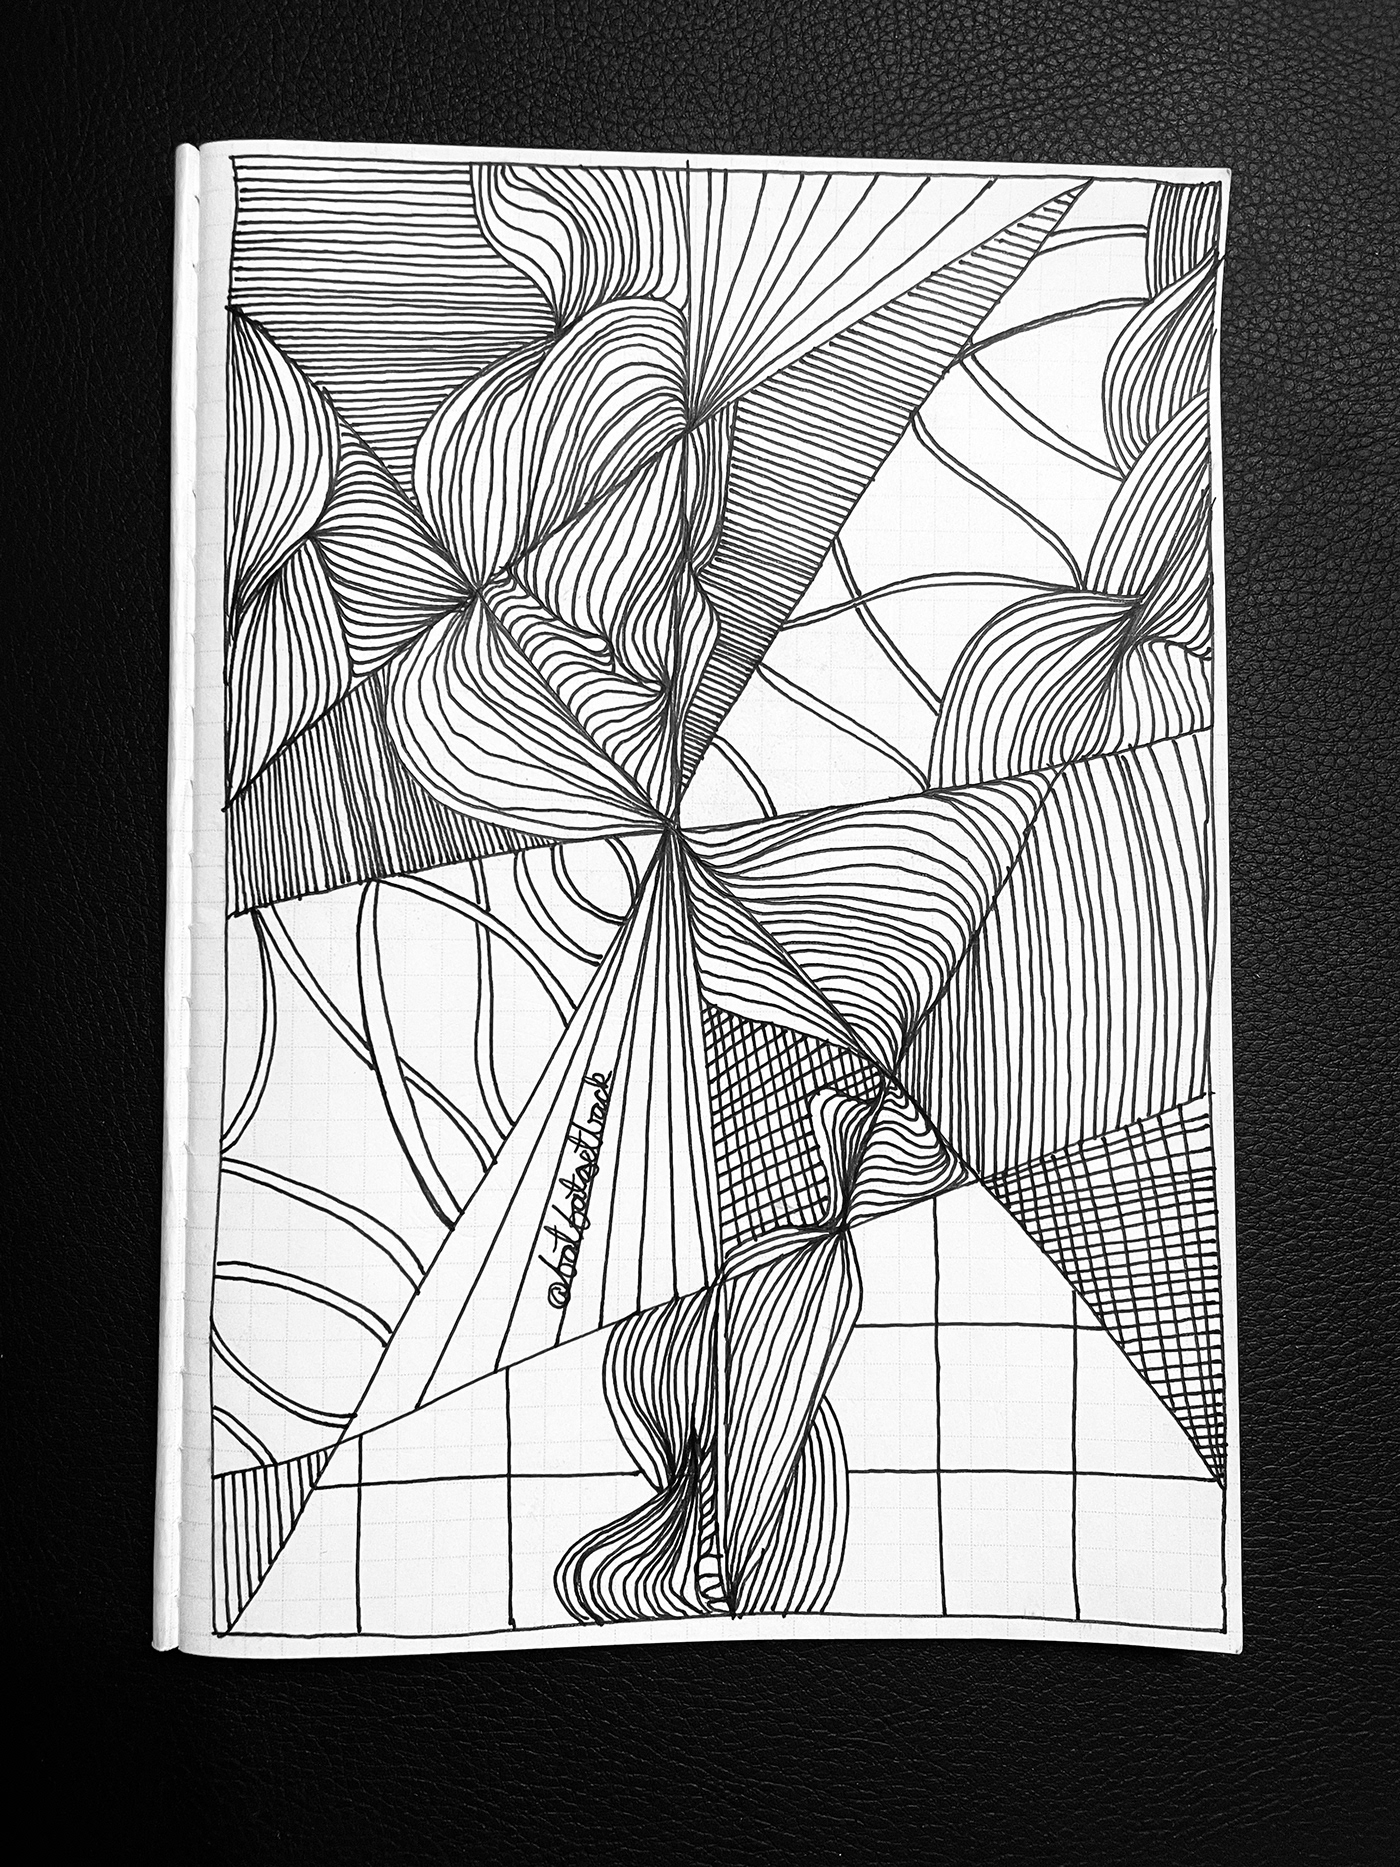 linework lineart linedrawing blackpen blackandwhite abstractart monster OnceUponaTime universe backtopaper BeingHuman linedoodle OUTTASPACE Zendoodle sketch quicksketch dailysketch paperdrawing handdrawings pendrawing art pieces fatfatgetback penandpaper   recording memories